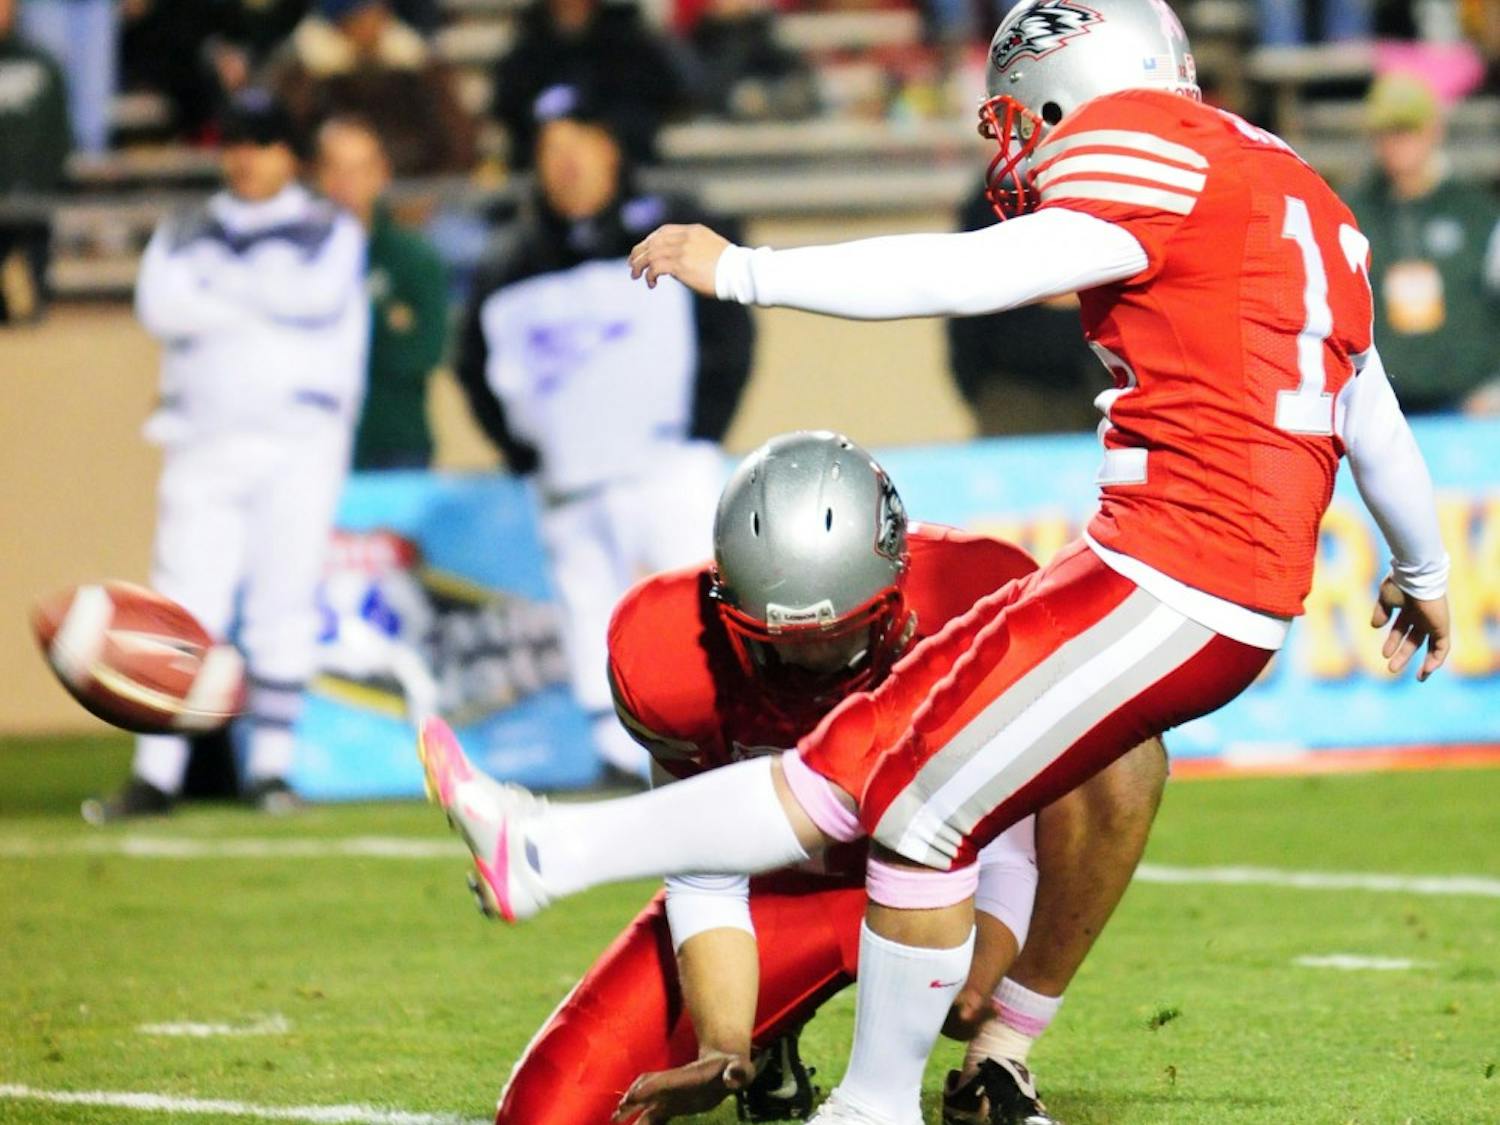 	James Aho boots a field goal during Saturday’s win over Colorado State. Aho kicked the game-winning field goal, propelling the Lobos to a 29-27 win at University Stadium, which is UNM’s first of the season.

